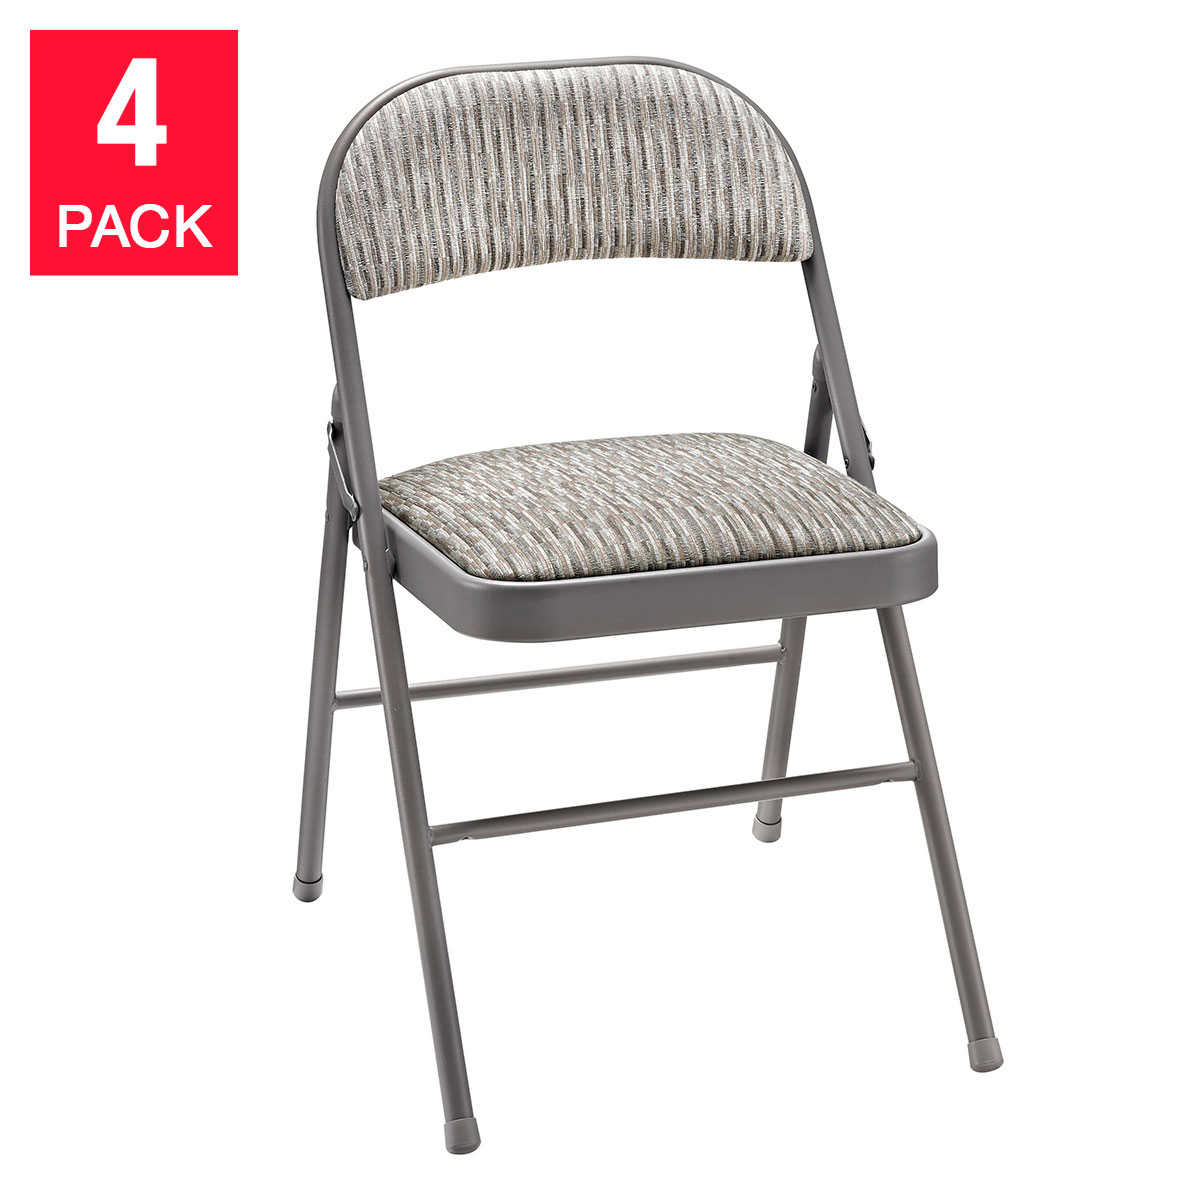 Meco Upholstered Folding Chair